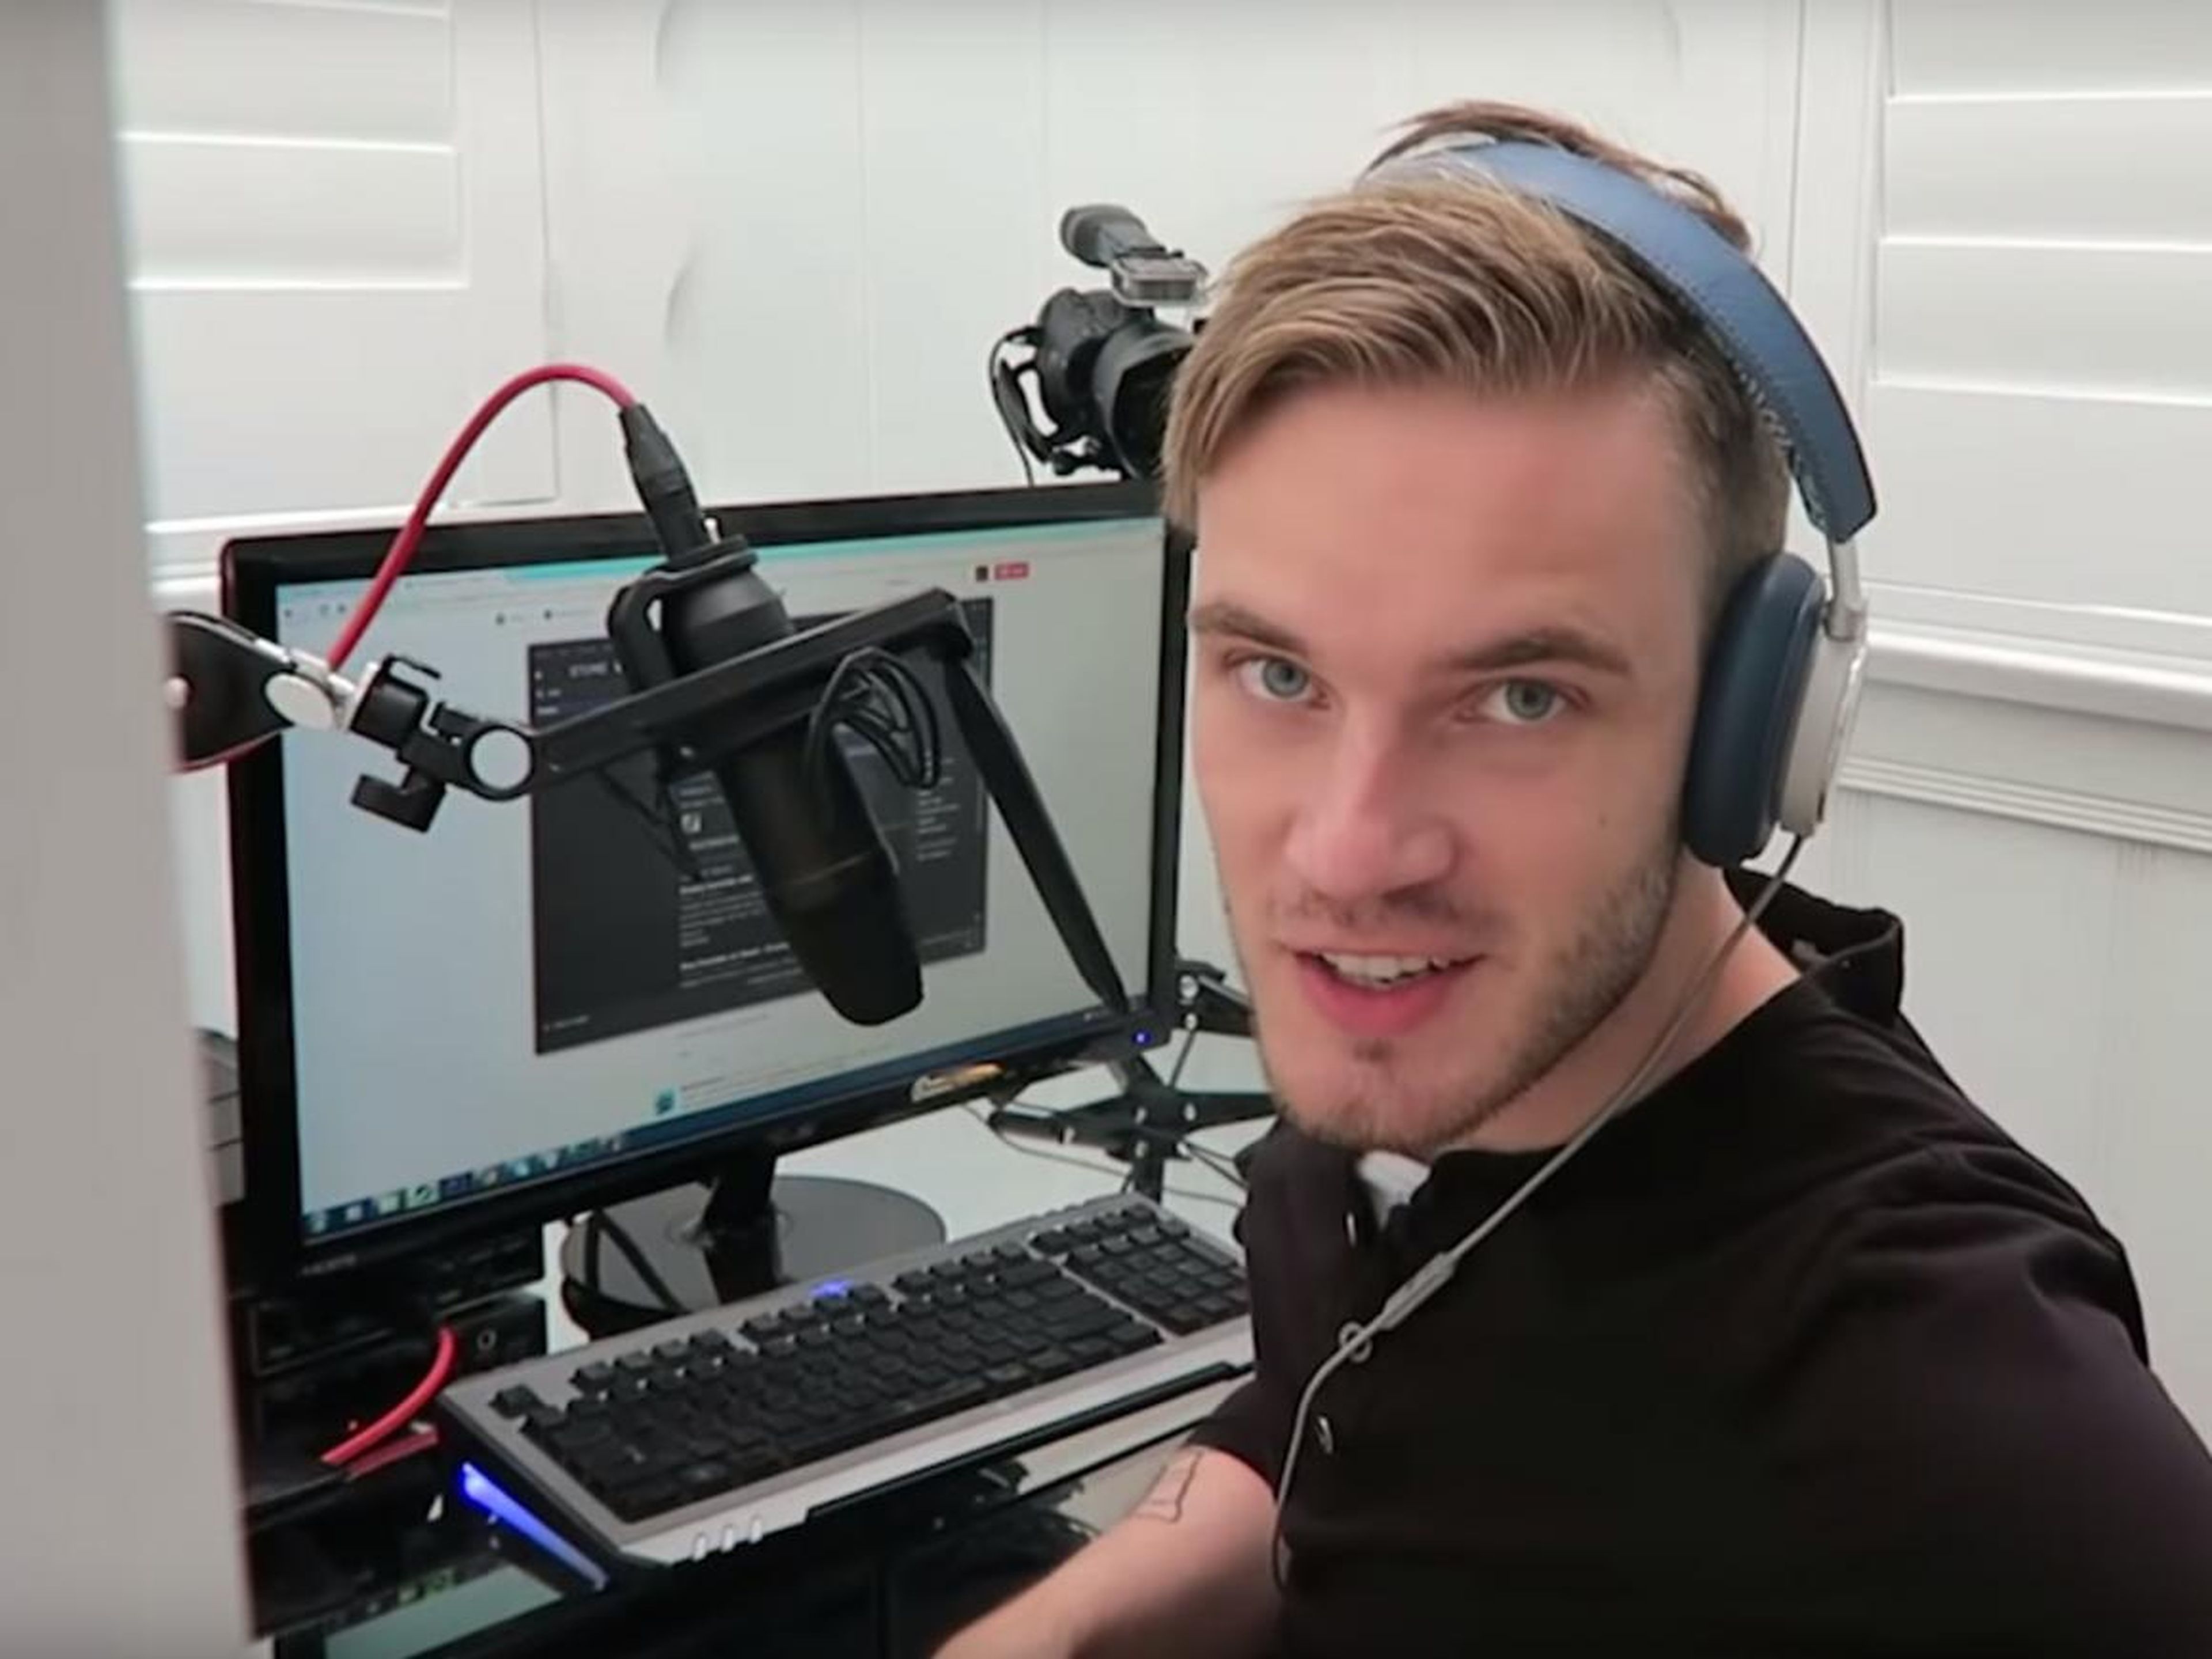 In the fallout from the WSJ report, Disney and YouTube cut ties with Kjellberg. Disney owned Maker Studios, the creator network Kjellberg was affiliated with, and called his videos "inappropriate." YouTube killed the second season